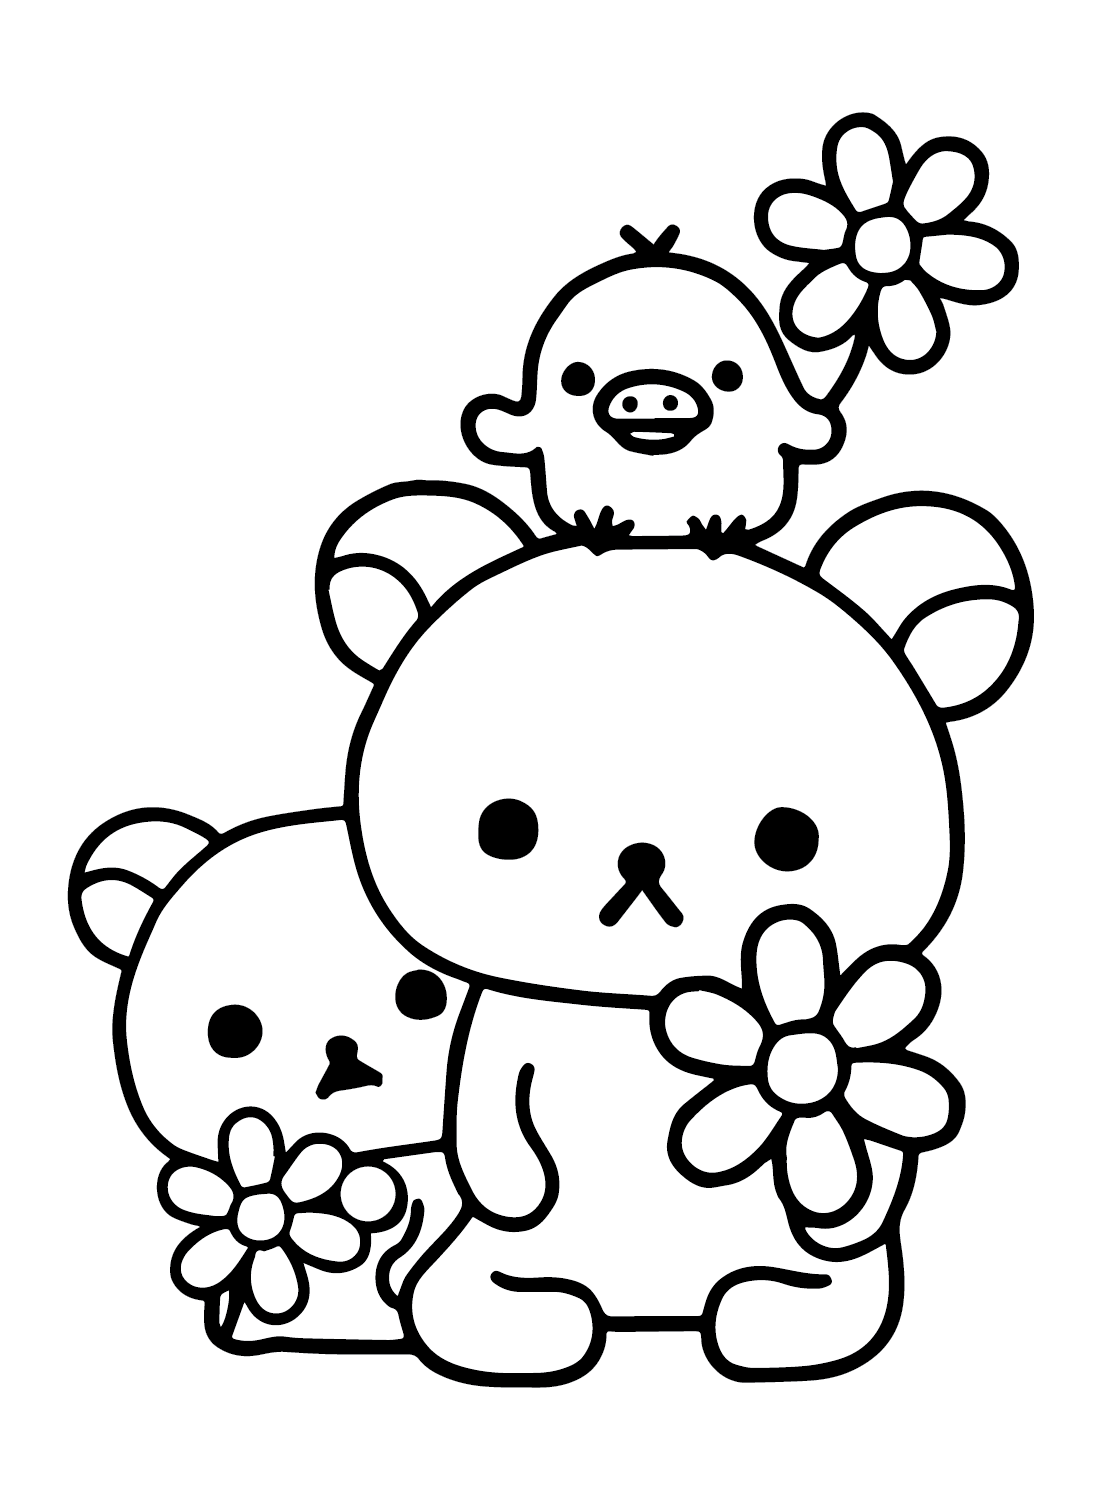 Rilakkuma coloring pages printable for free download